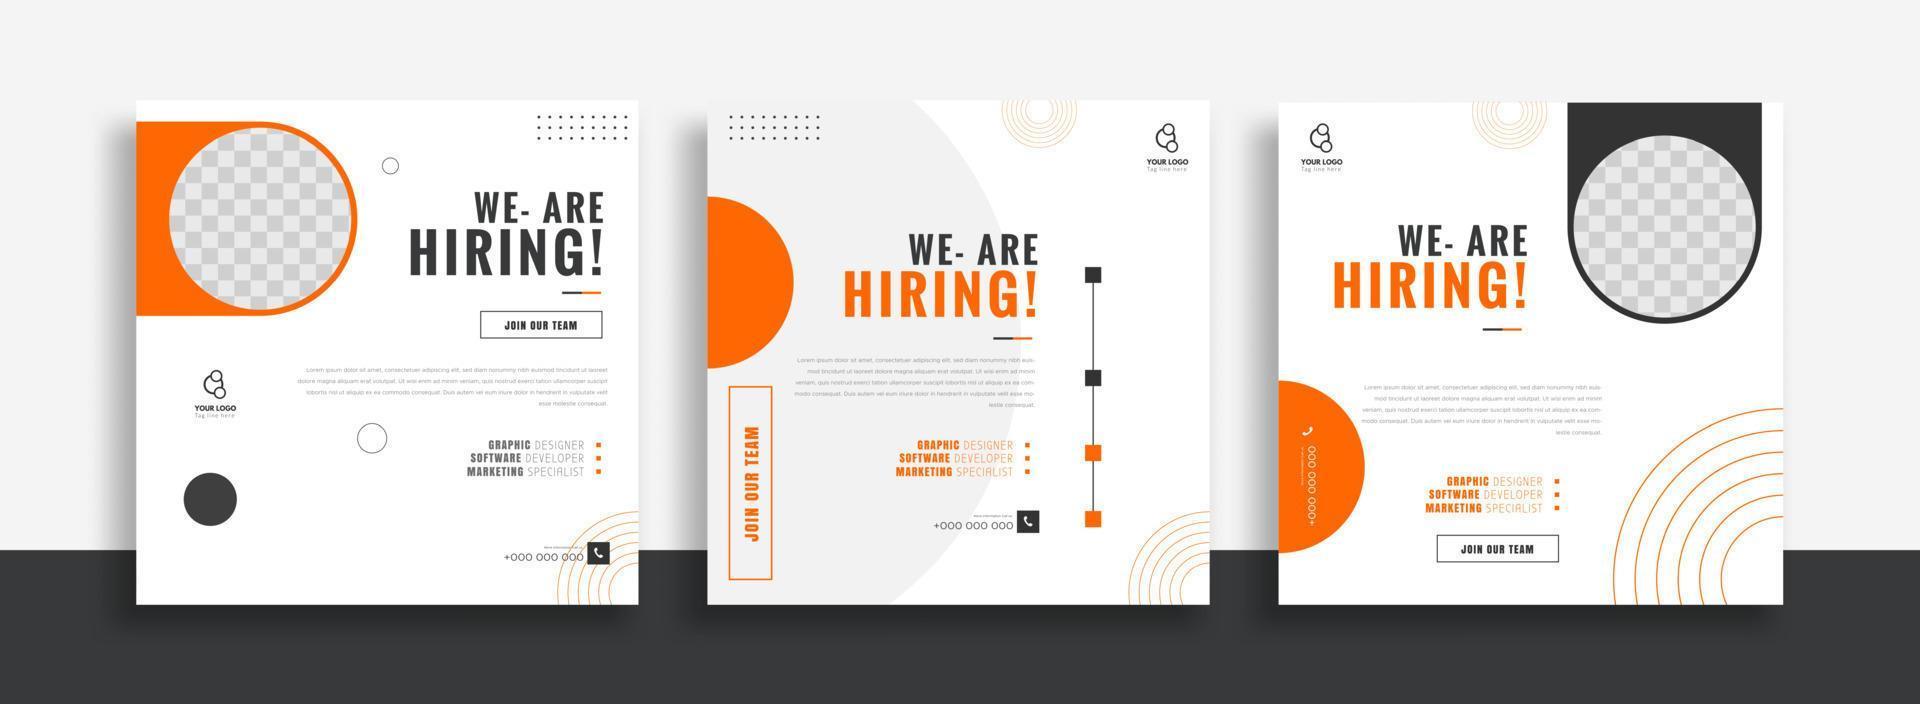 We are hiring job vacancy social media post banner design template with green and black color. We are hiring job vacancy square web banner design. vector